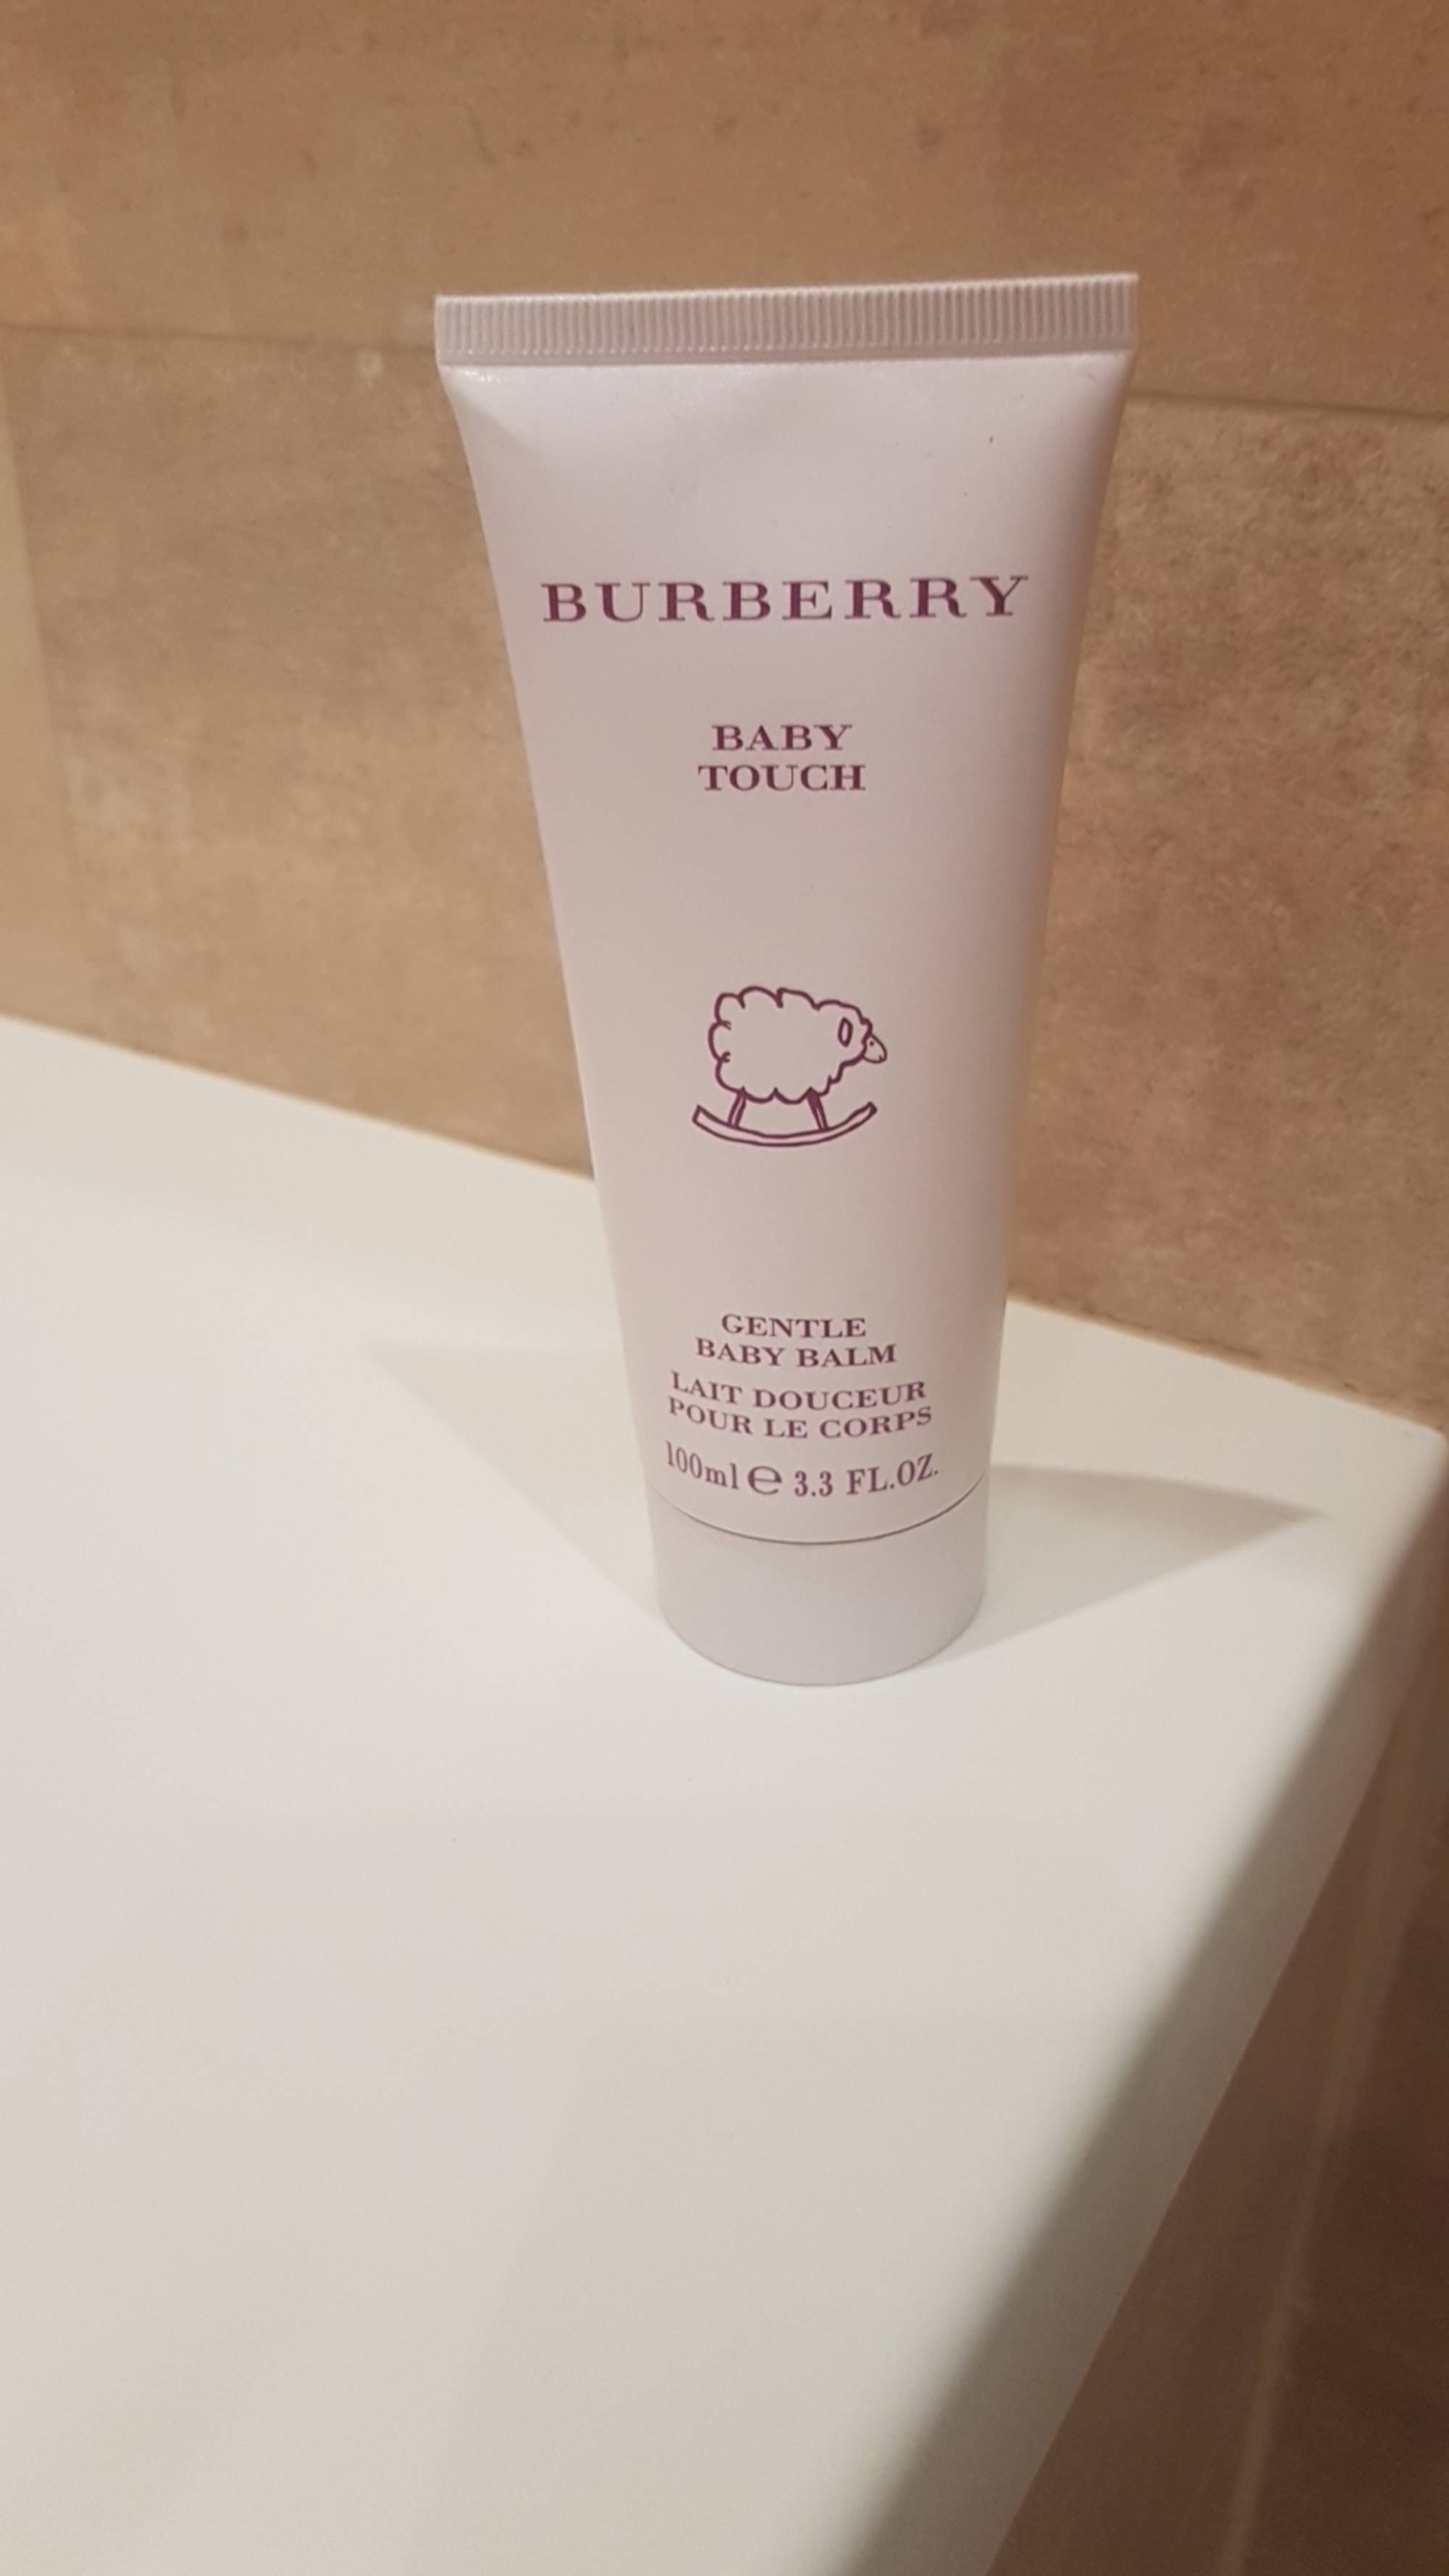 BURBERRY - Baby touch - Gentle baby balm